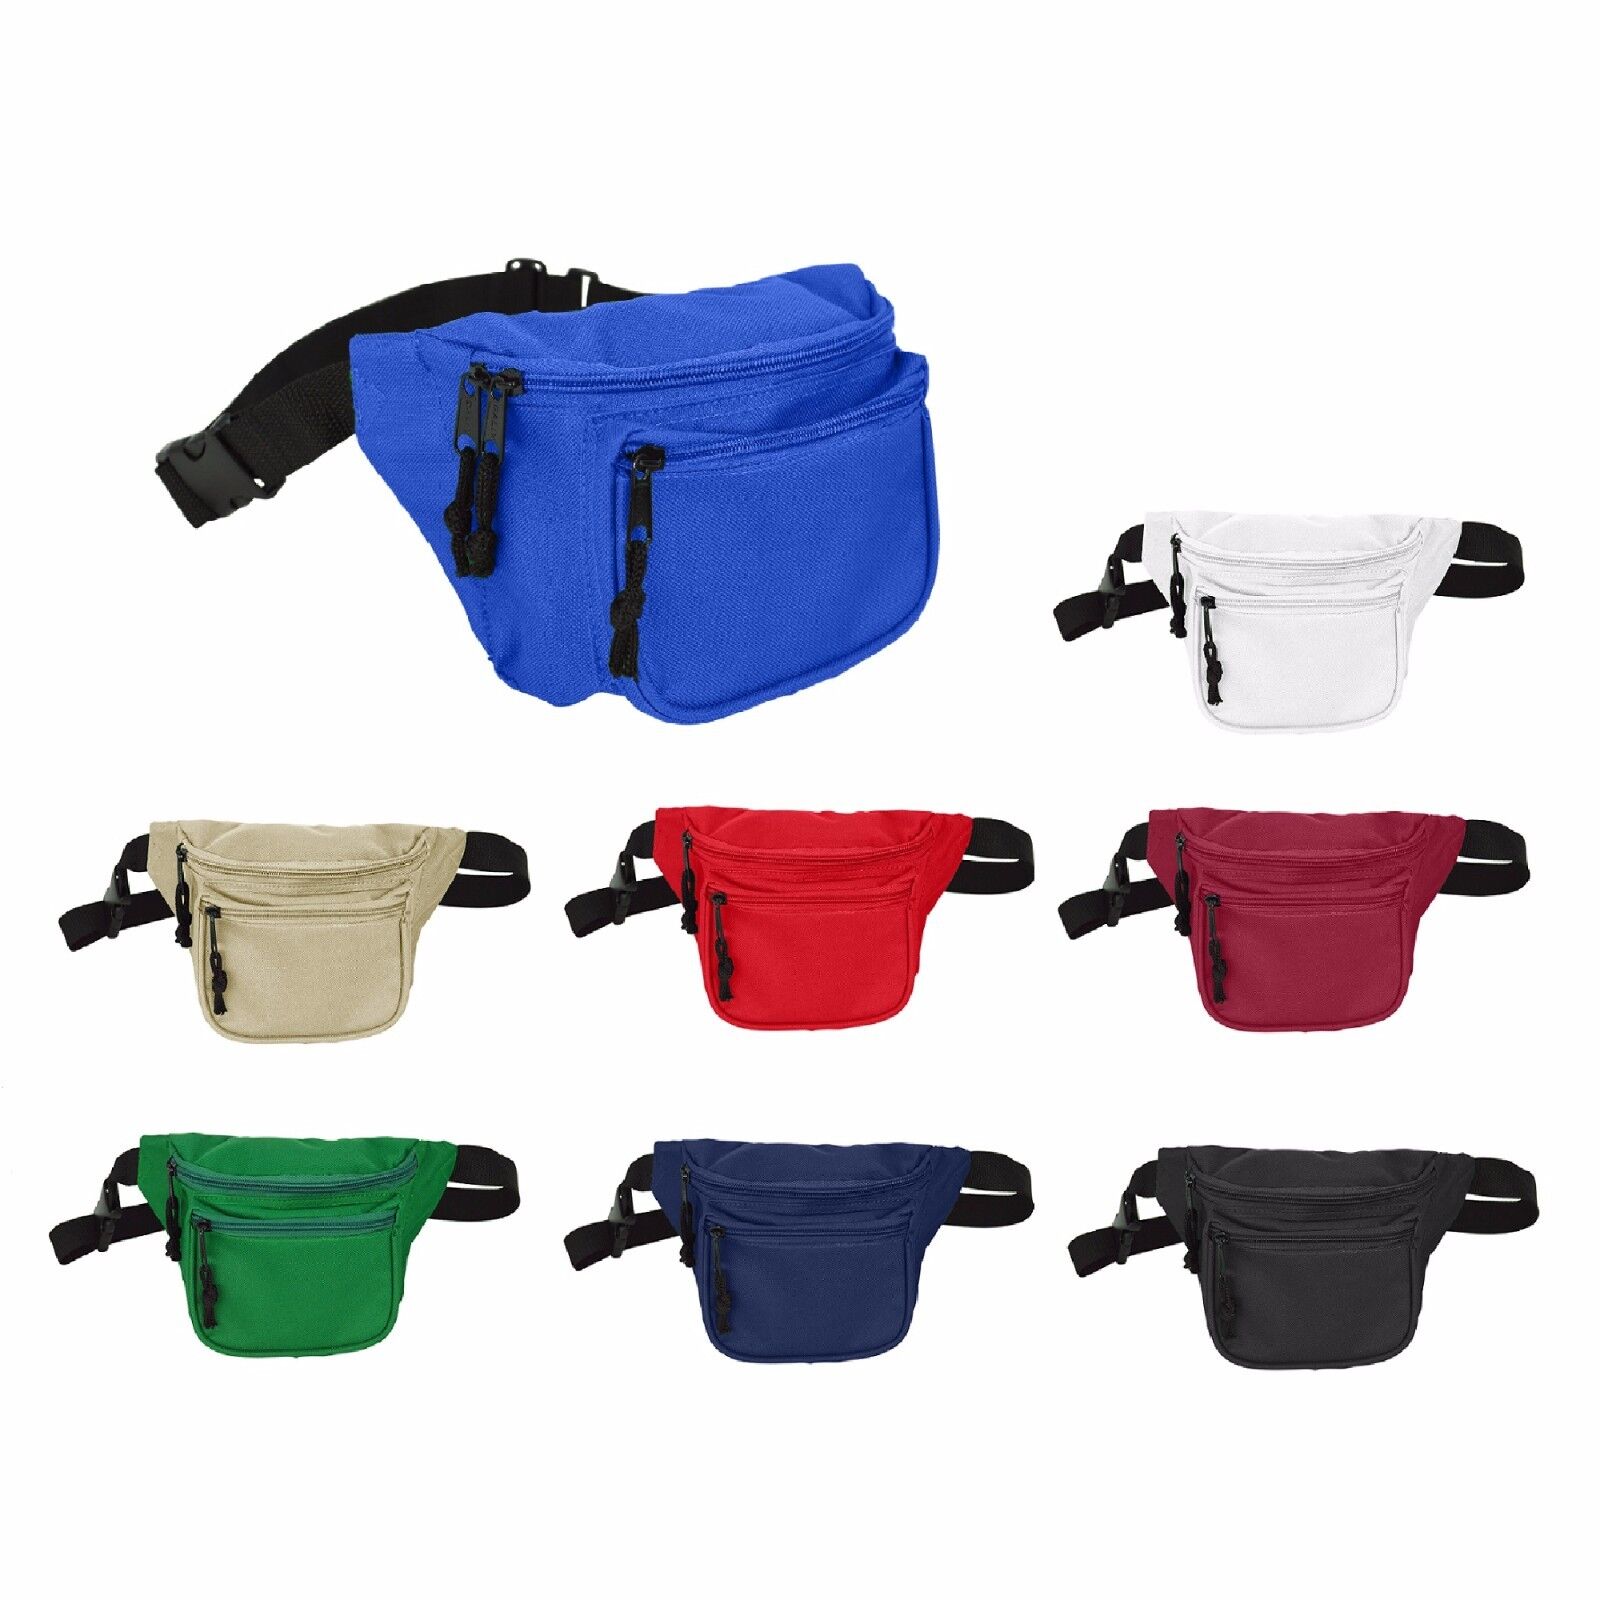 DALIX Fanny Pack with 3 Pockets Blue Black Maroon Travel Waist Pouch Adjustable DALIX